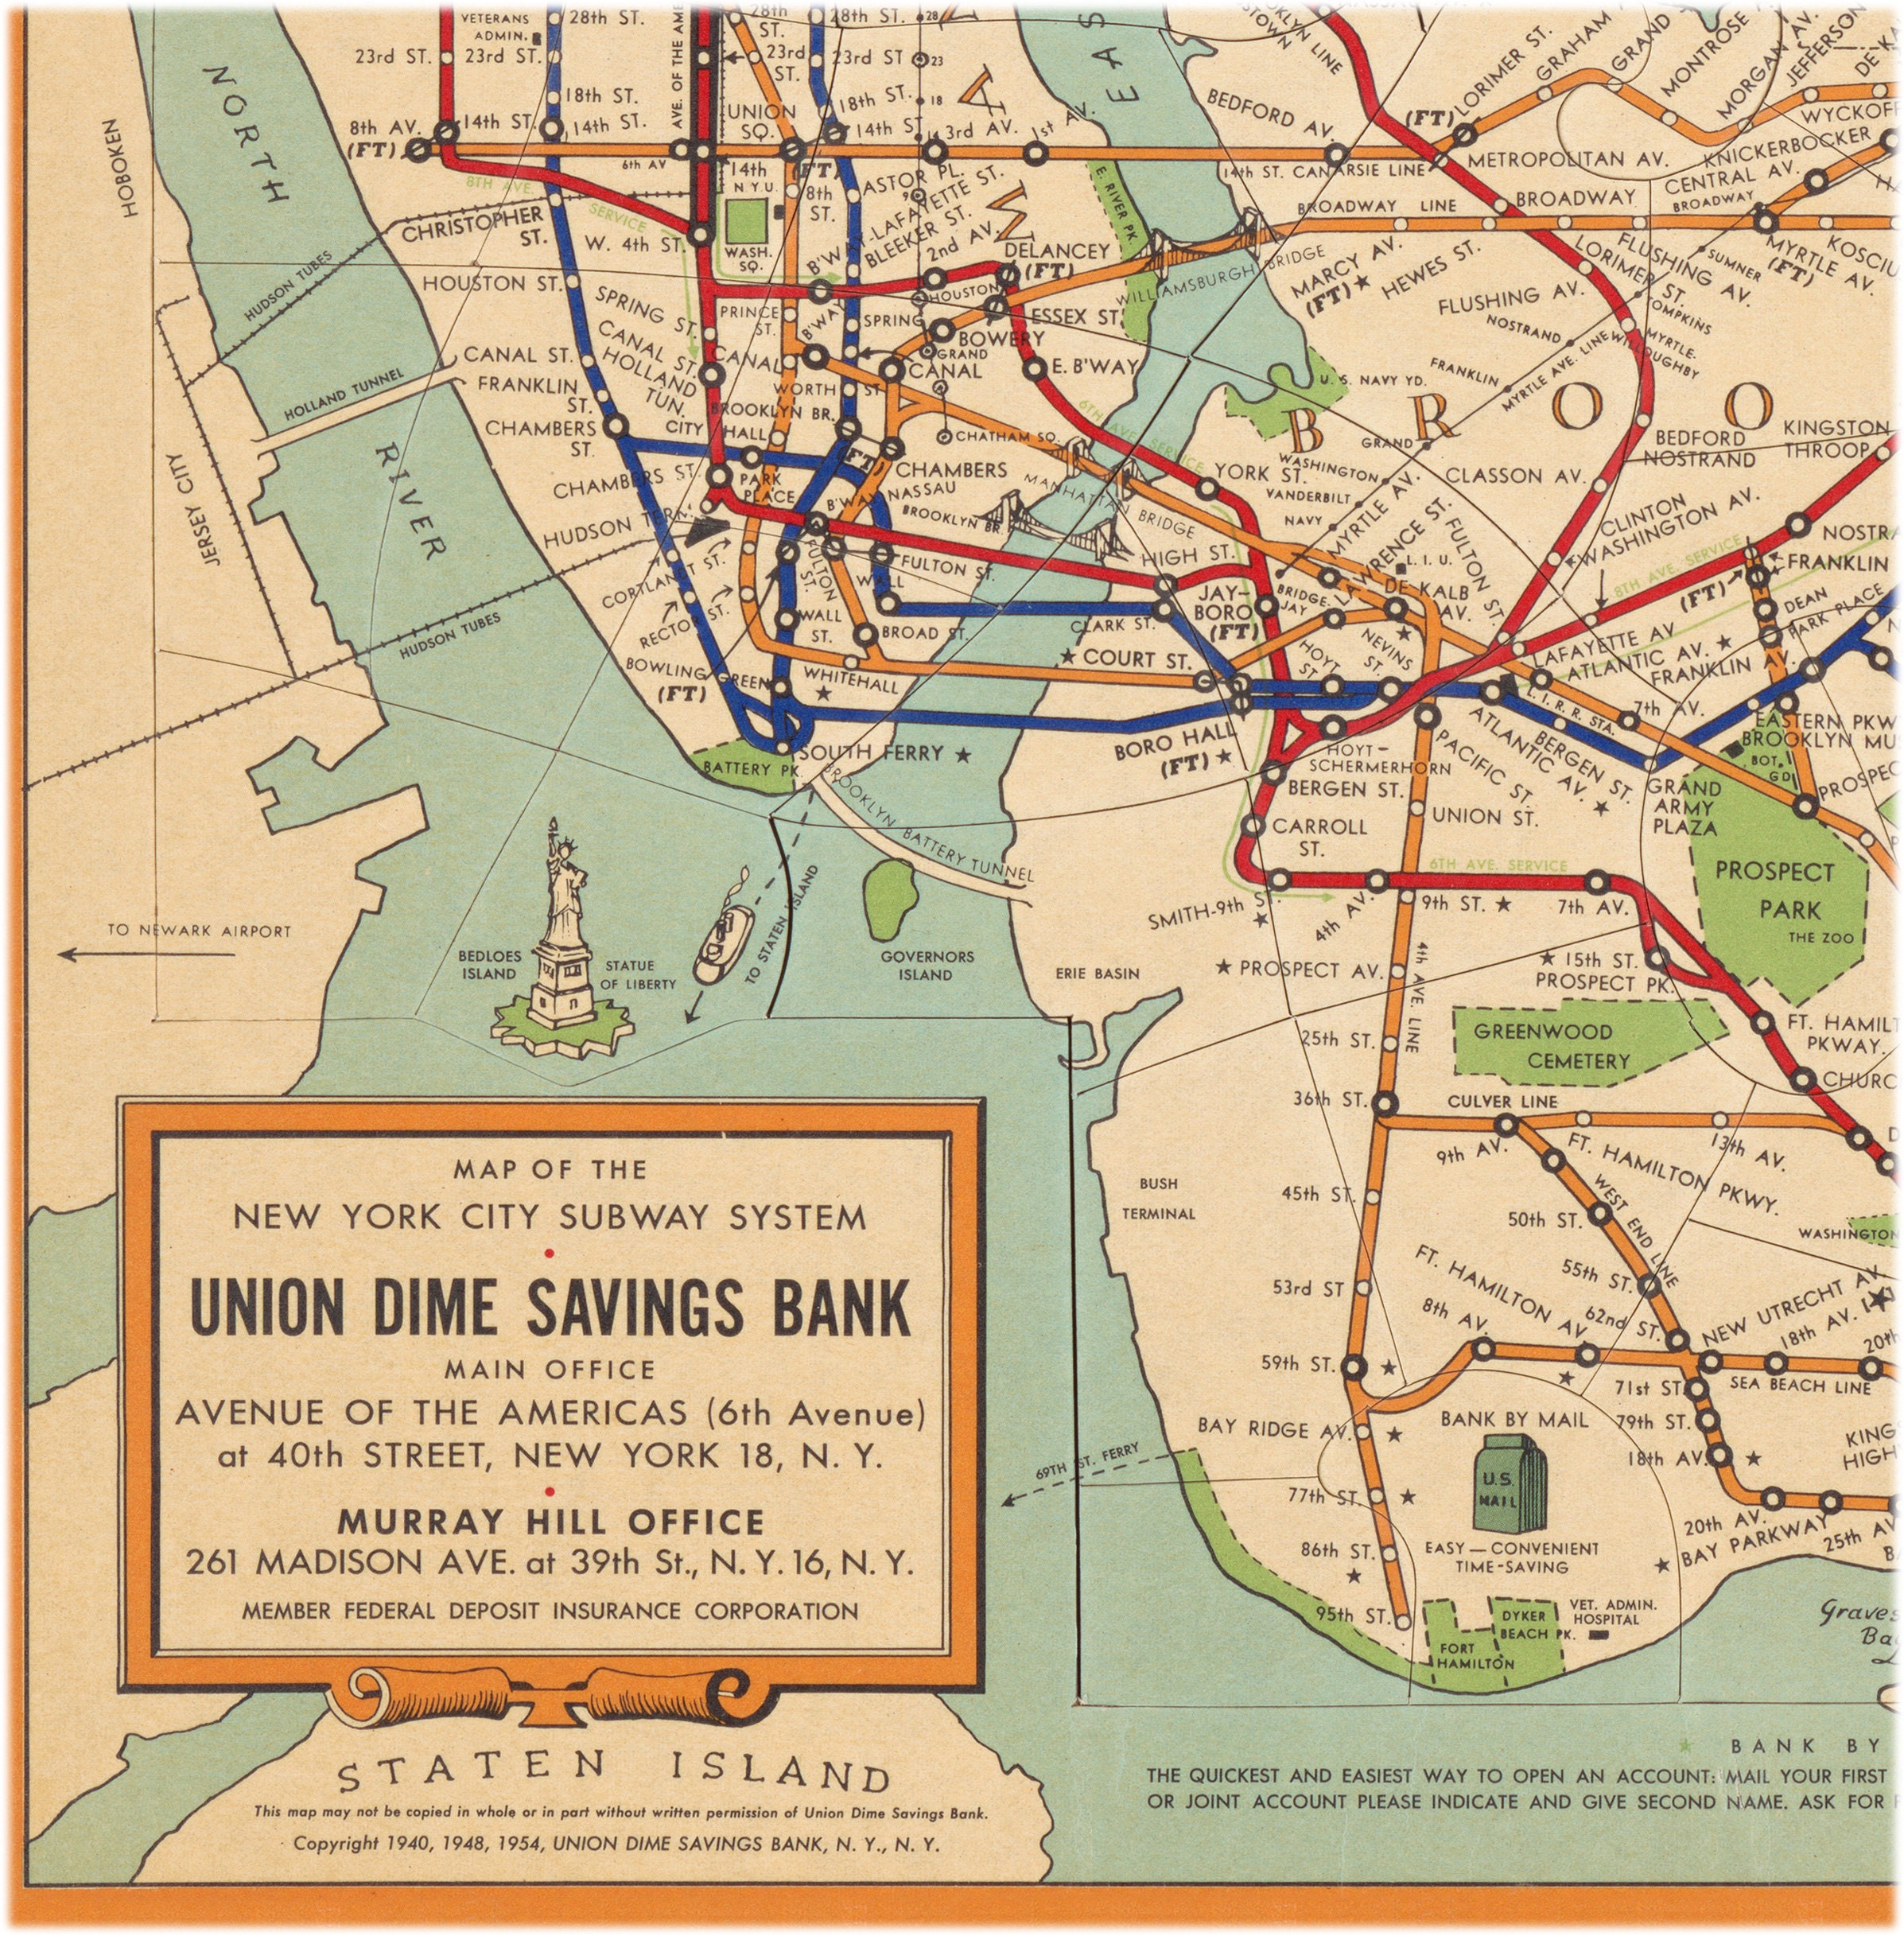 Old Map of New York City subway system 1954 vintage subway | Etsy